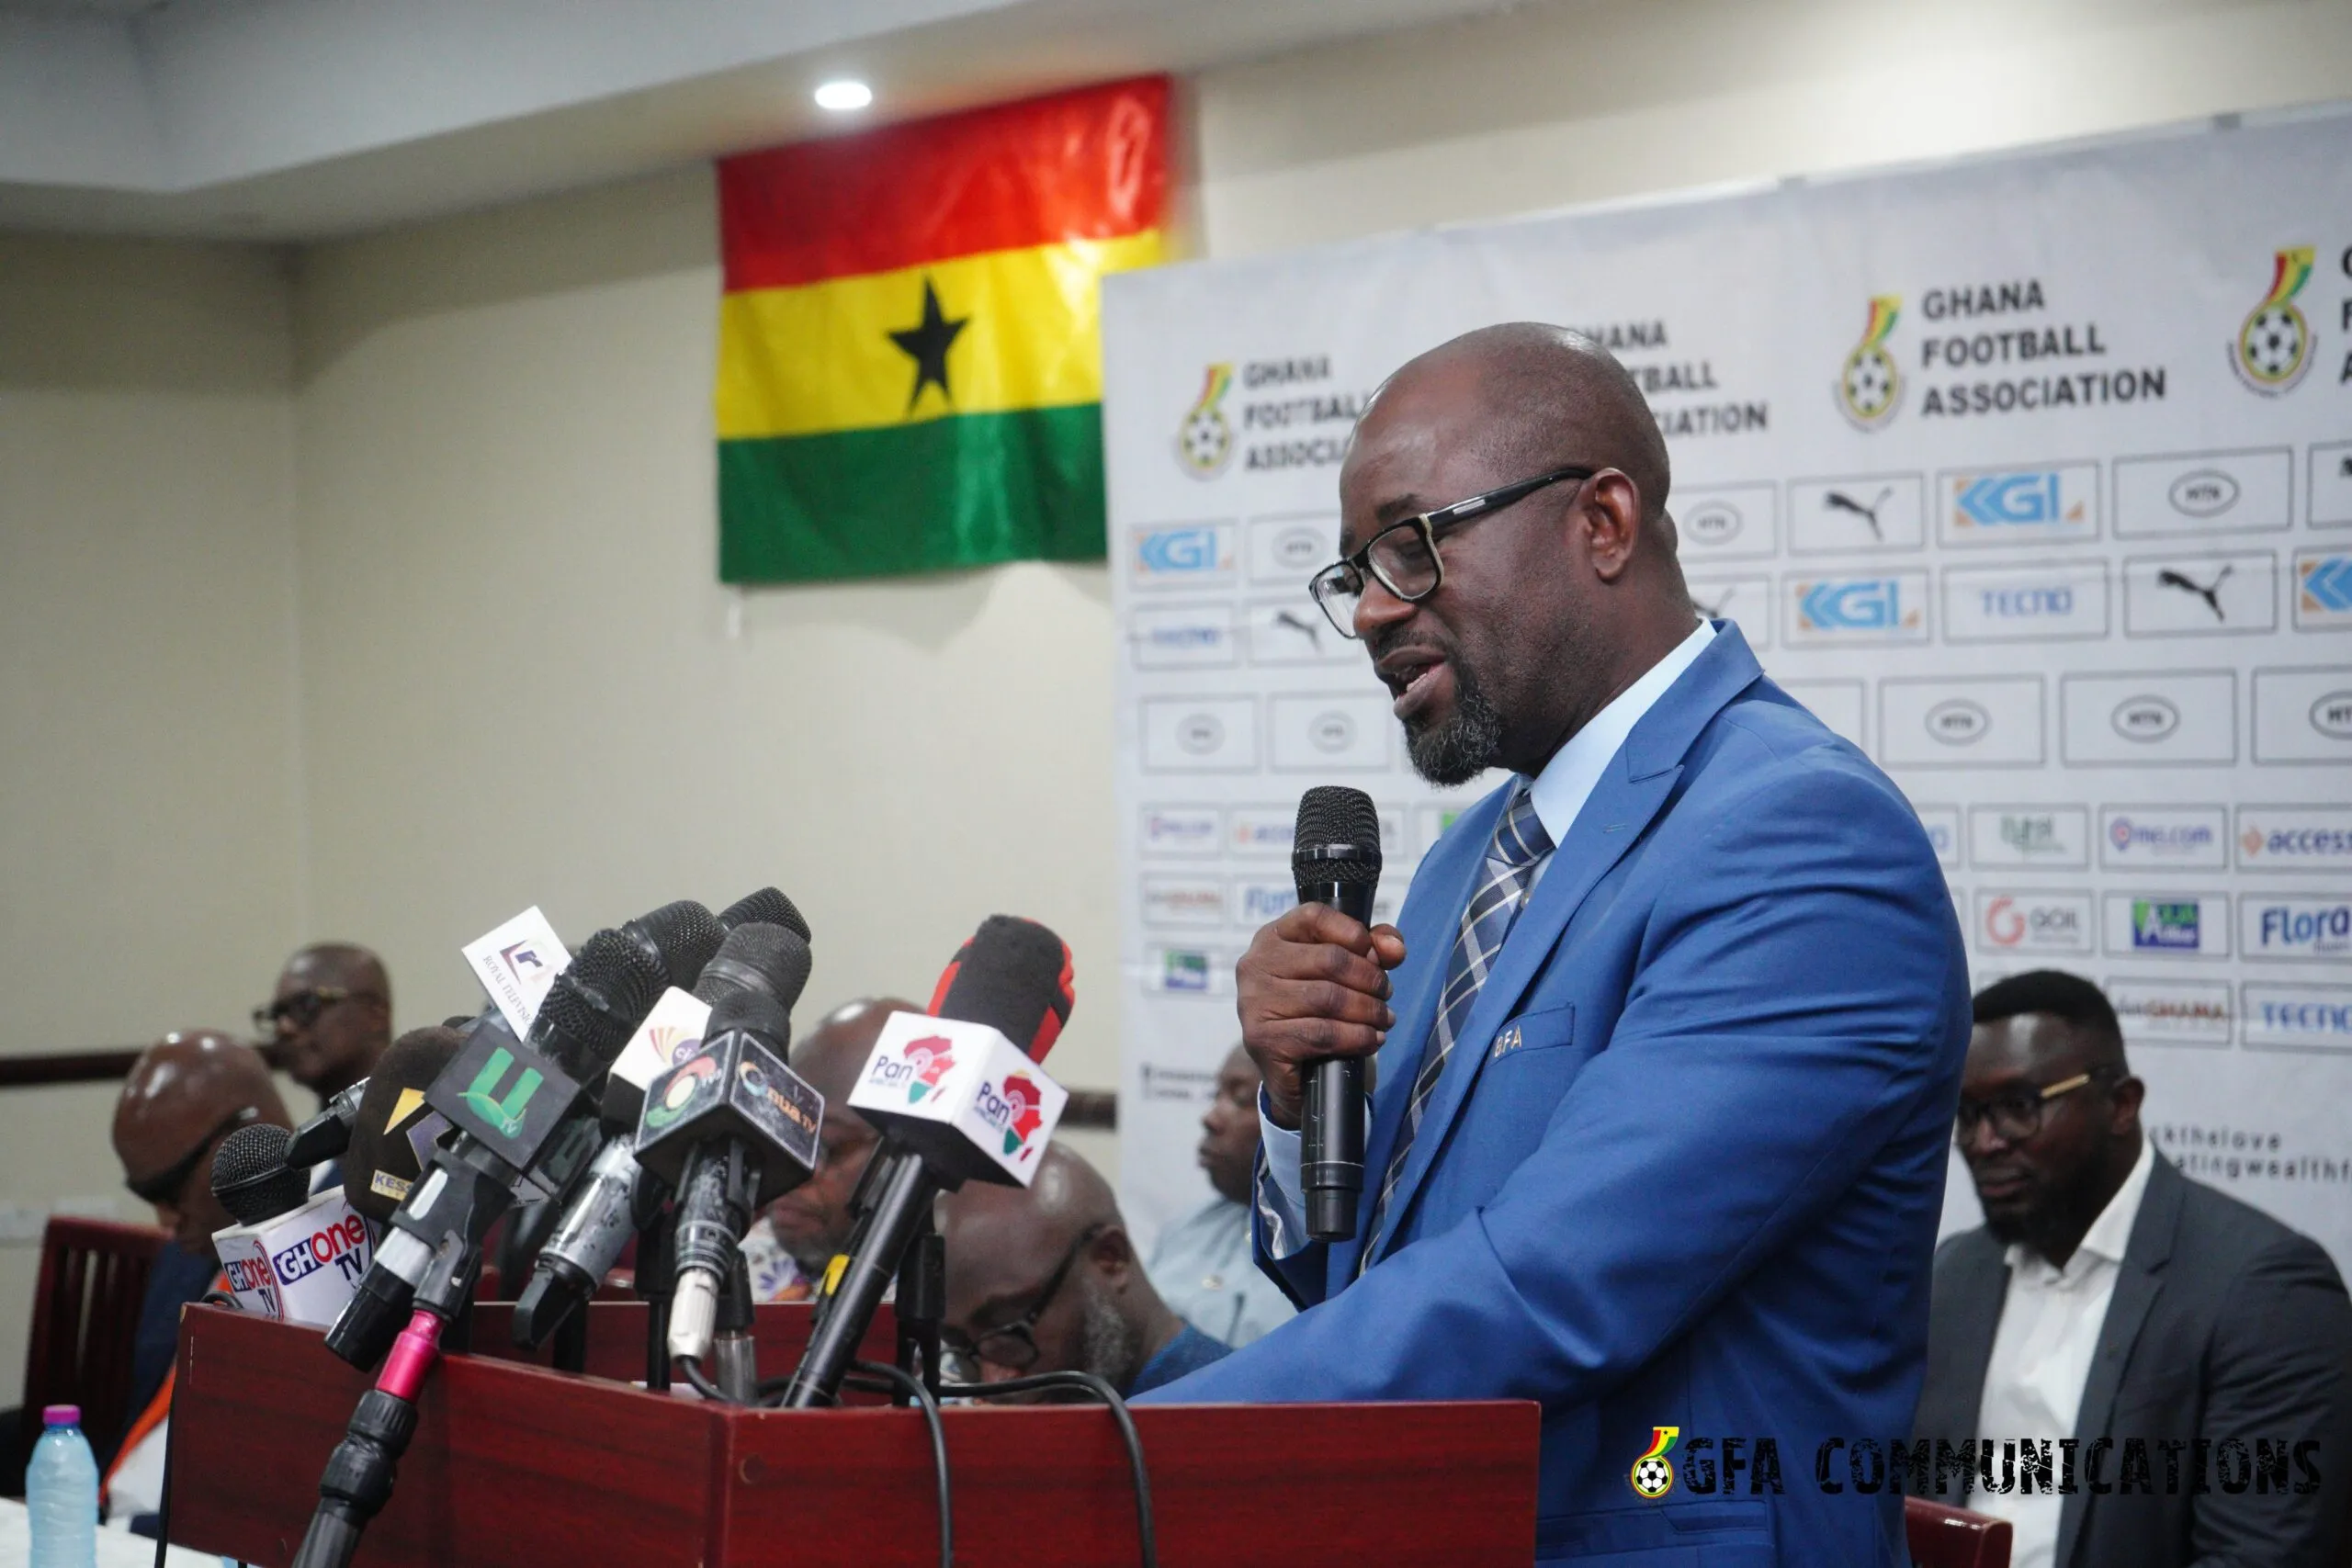 My vision is to win both the World Cup and the AFCON, says Ghana Football Association President Kurt Okraku